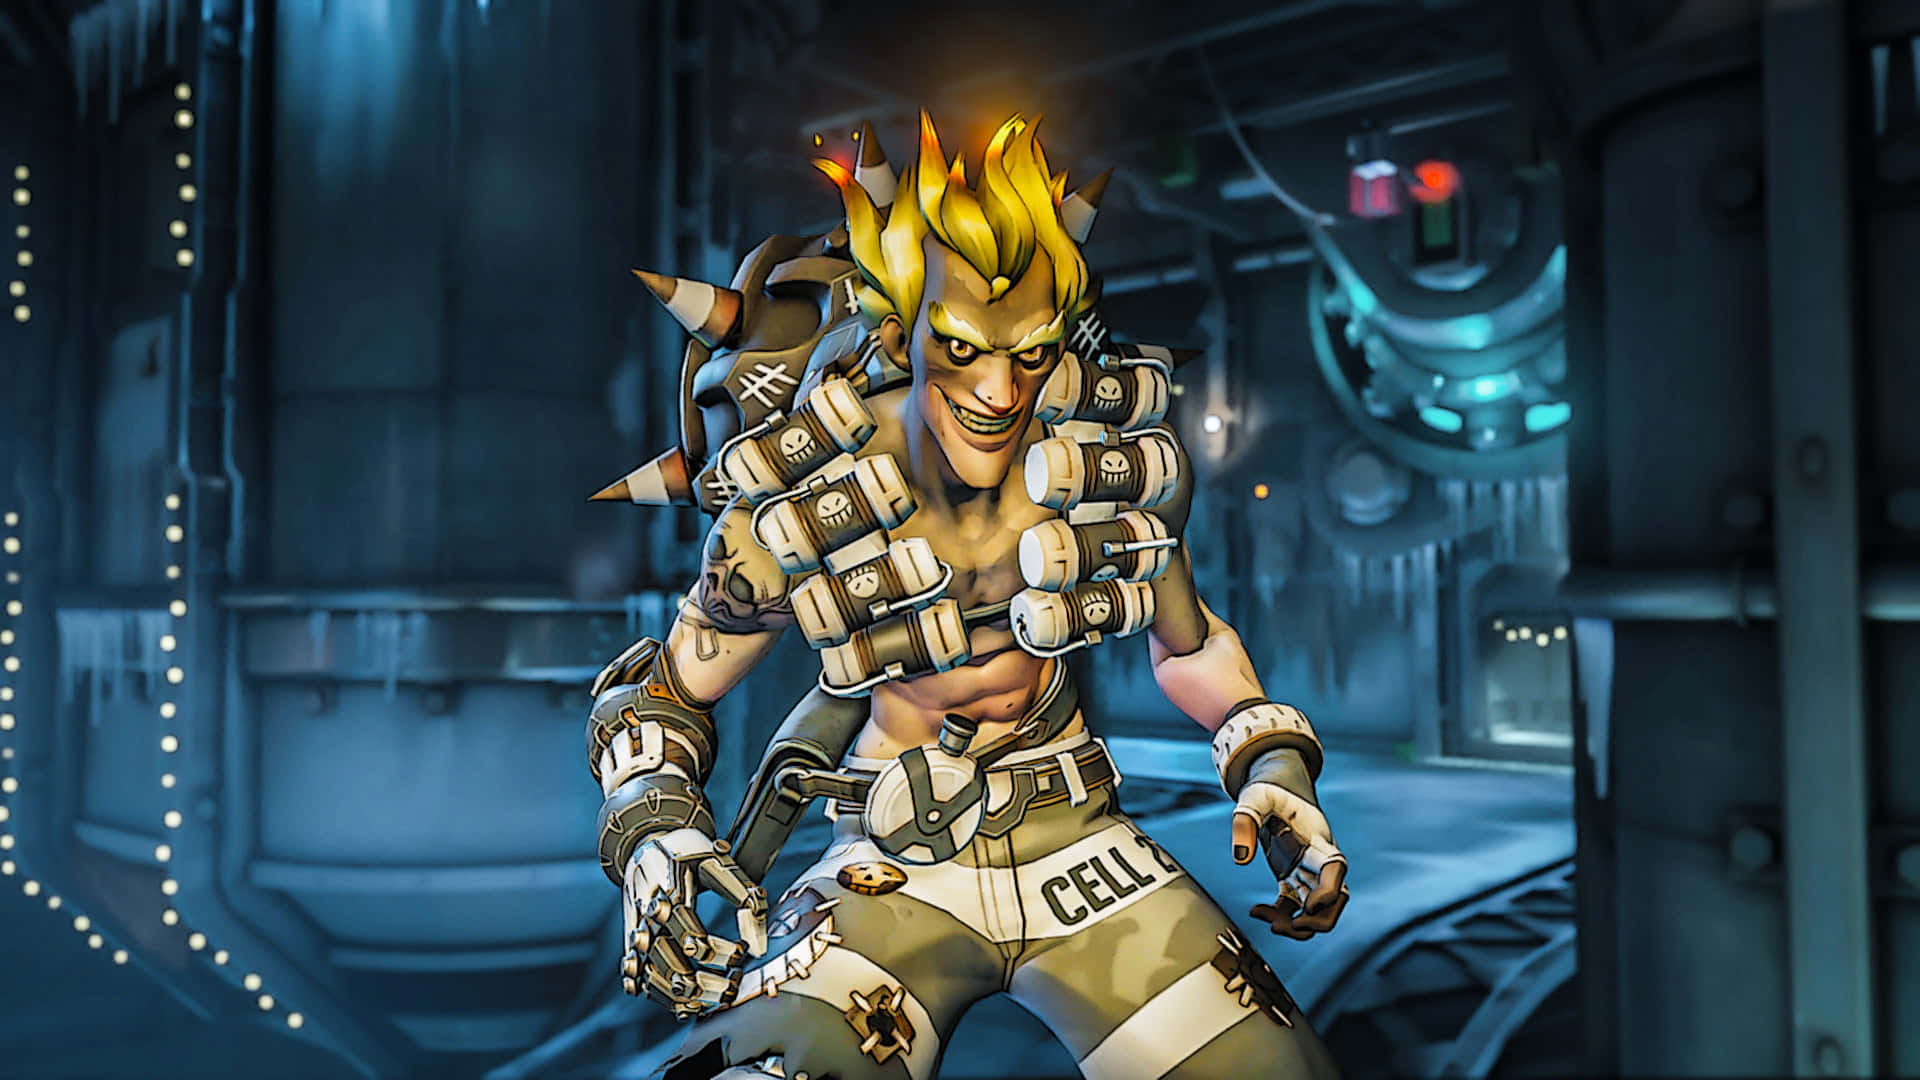 Cut the wires, blow it up, watch the fireworks - Junkrat Wallpaper